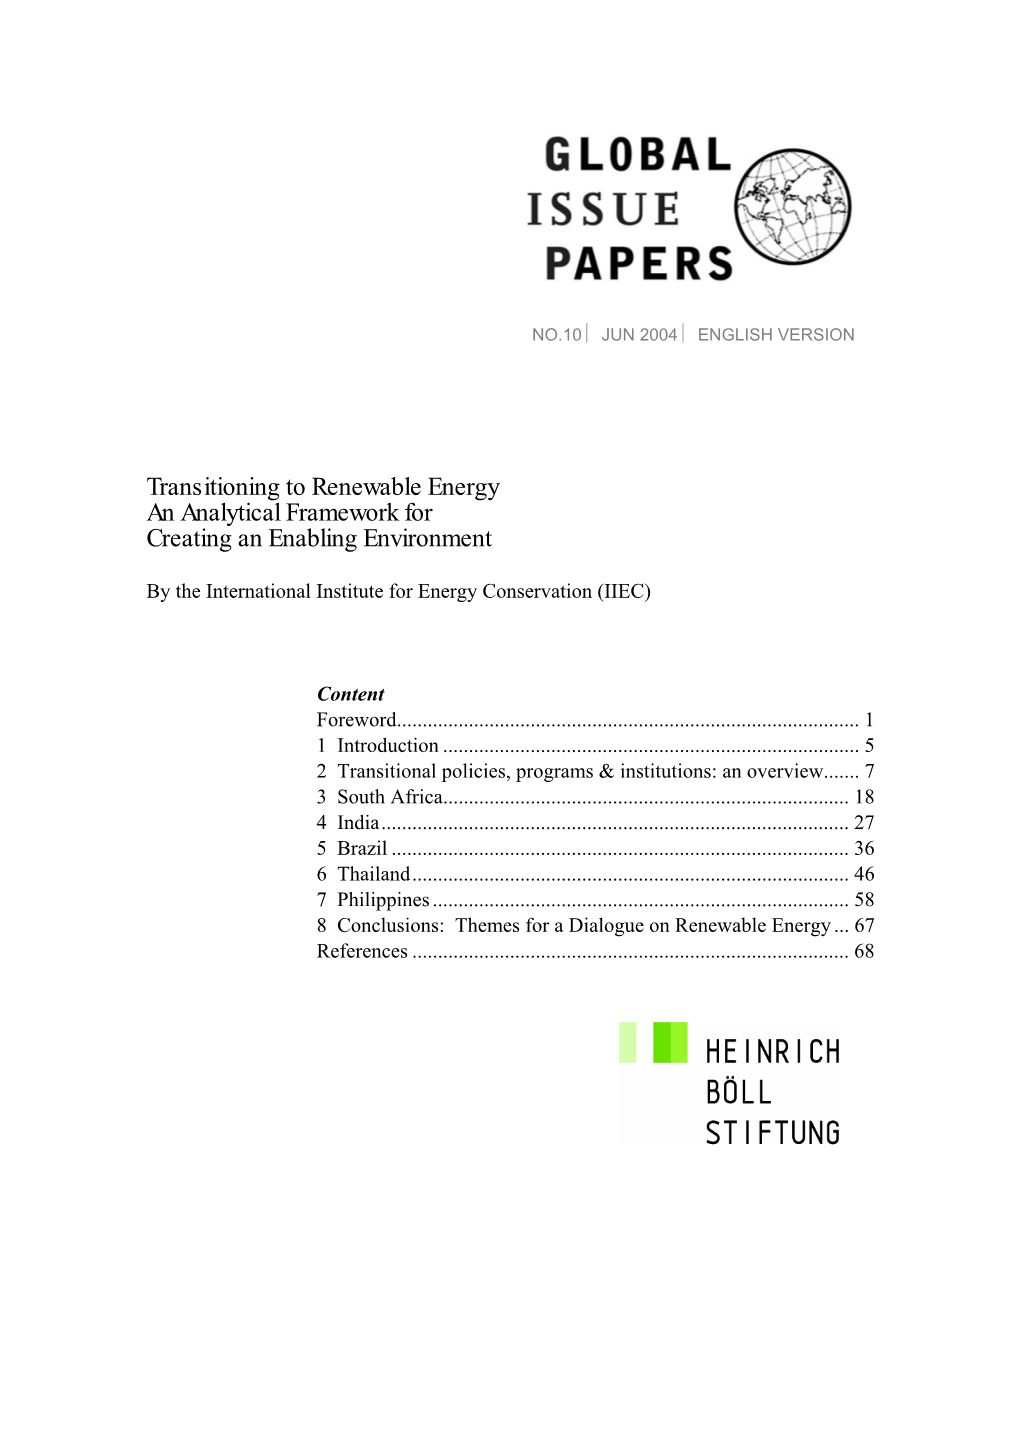 Transitioning to Renewable Energy an Analytical Framework for Creating an Enabling Environment